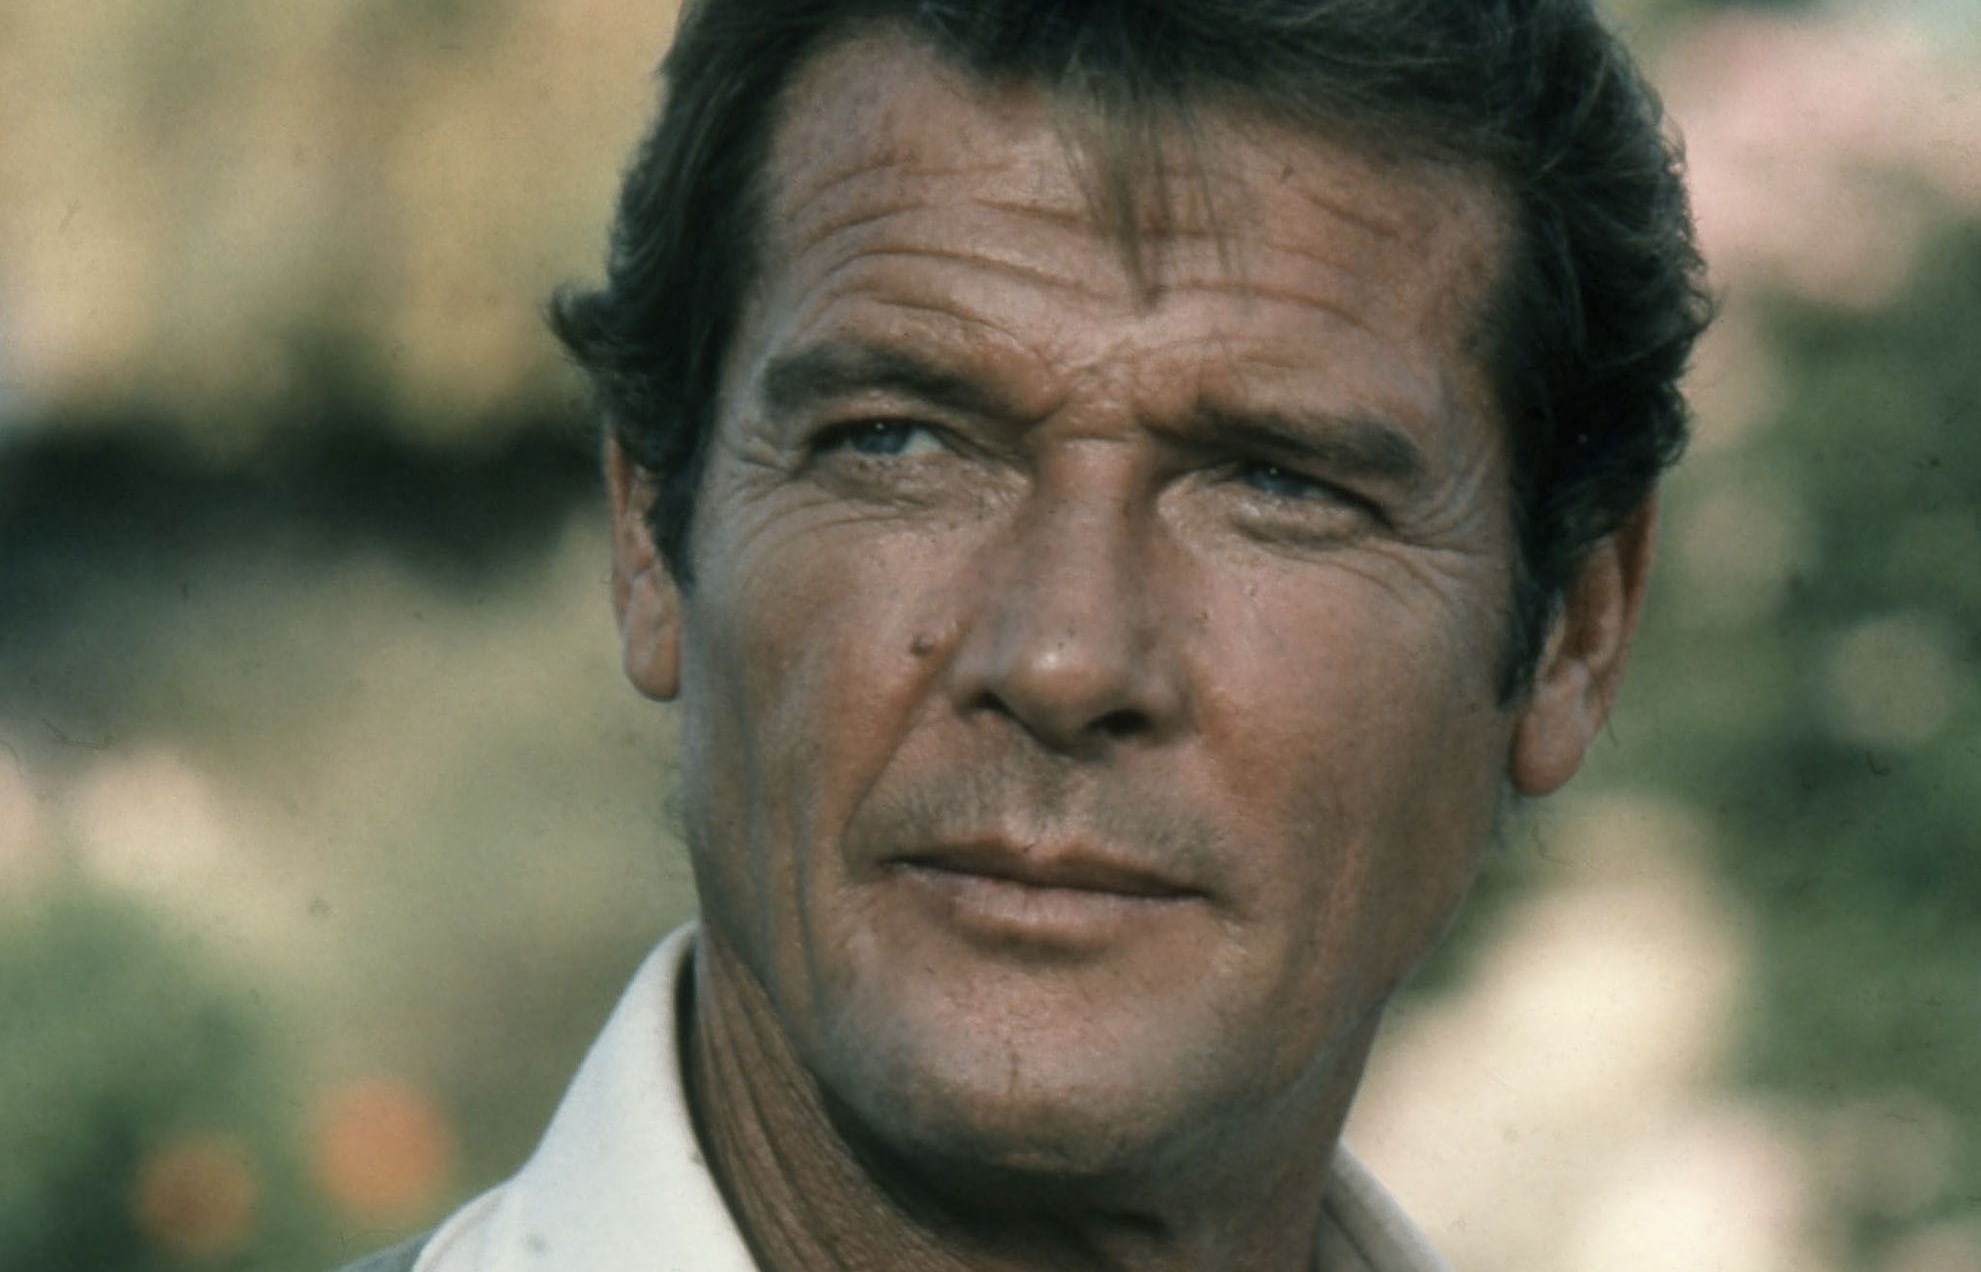 Roger Moore in the film 'For Your Eyes Only'.